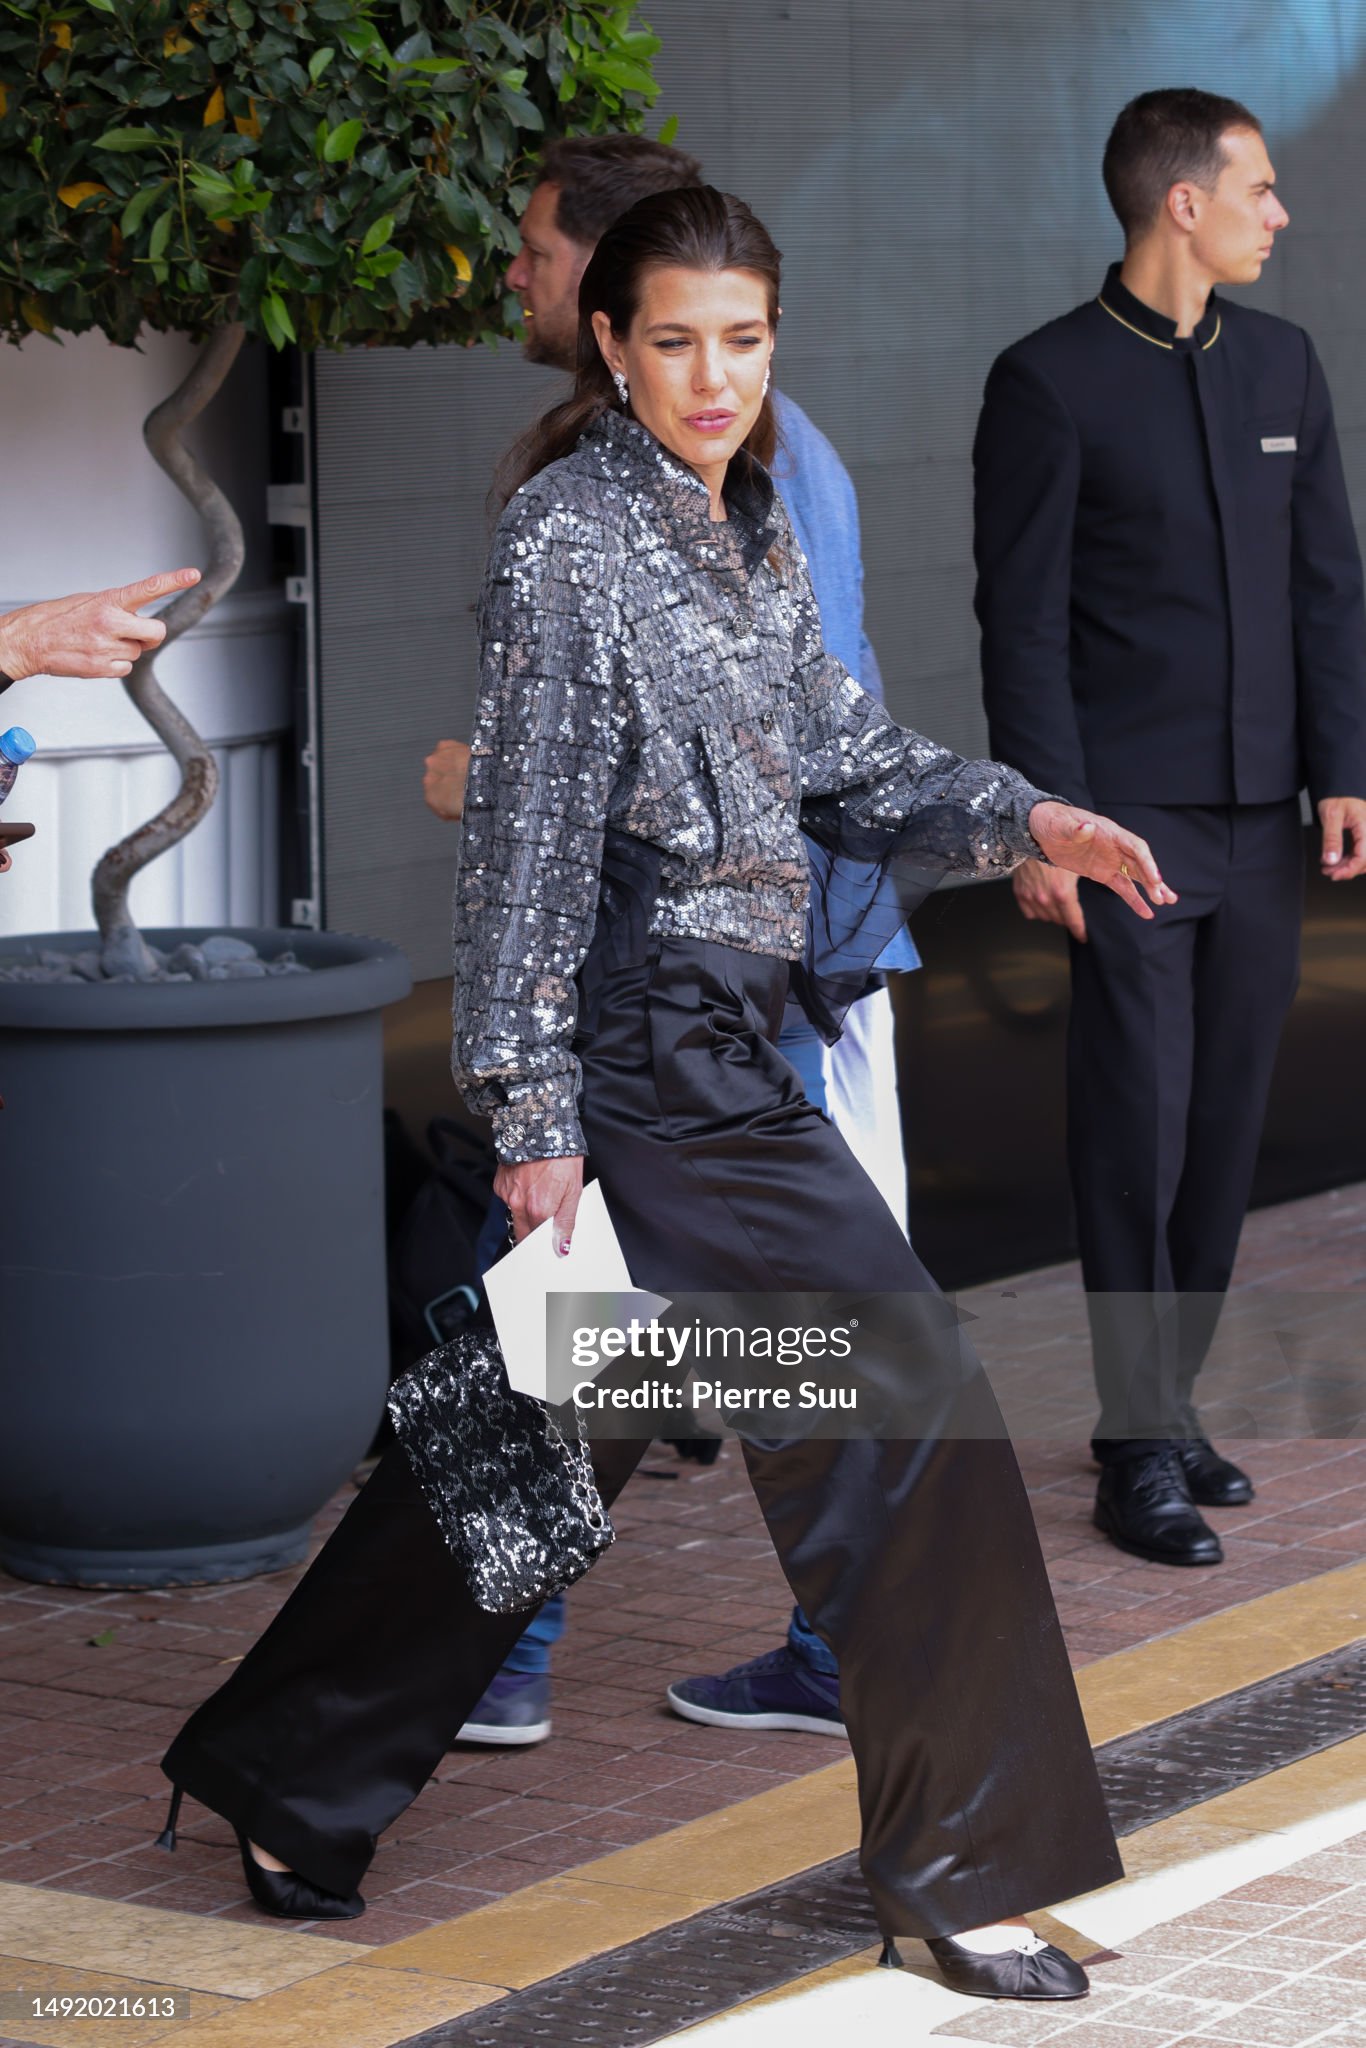 charlotte-casiraghi-is-seen-at-le-majestic-hotel-during-the-76th-cannes-film-festival-on-may.jpg